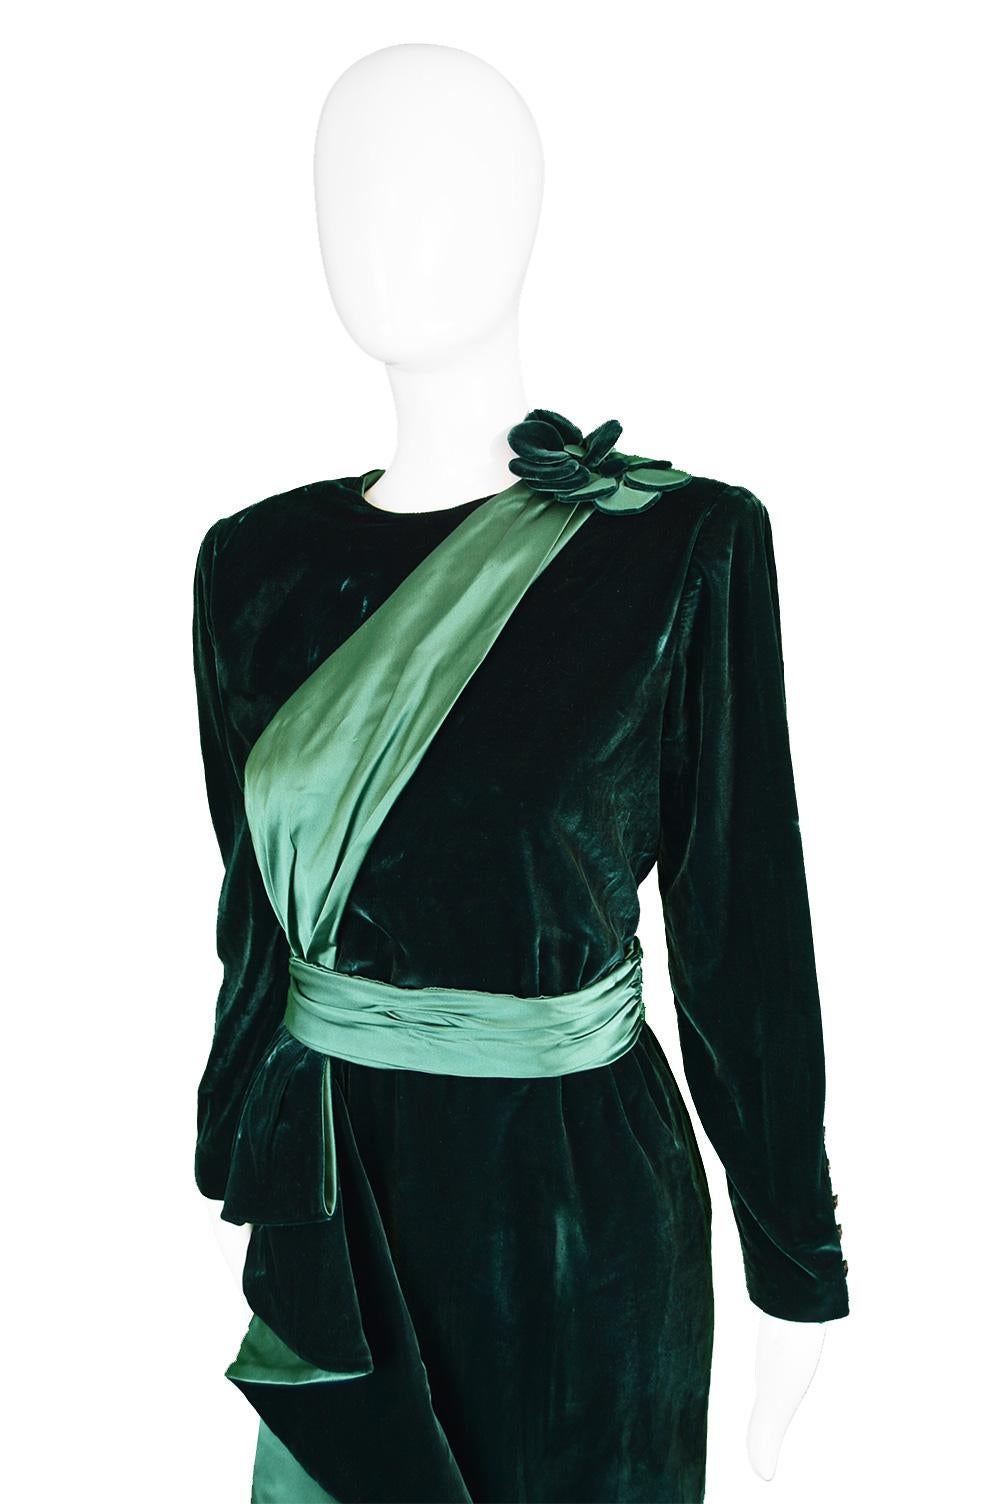 Nina Ricci Vintage Dark Green Velvet Swag Detail Evening Dress, 1980s In Excellent Condition For Sale In Doncaster, South Yorkshire